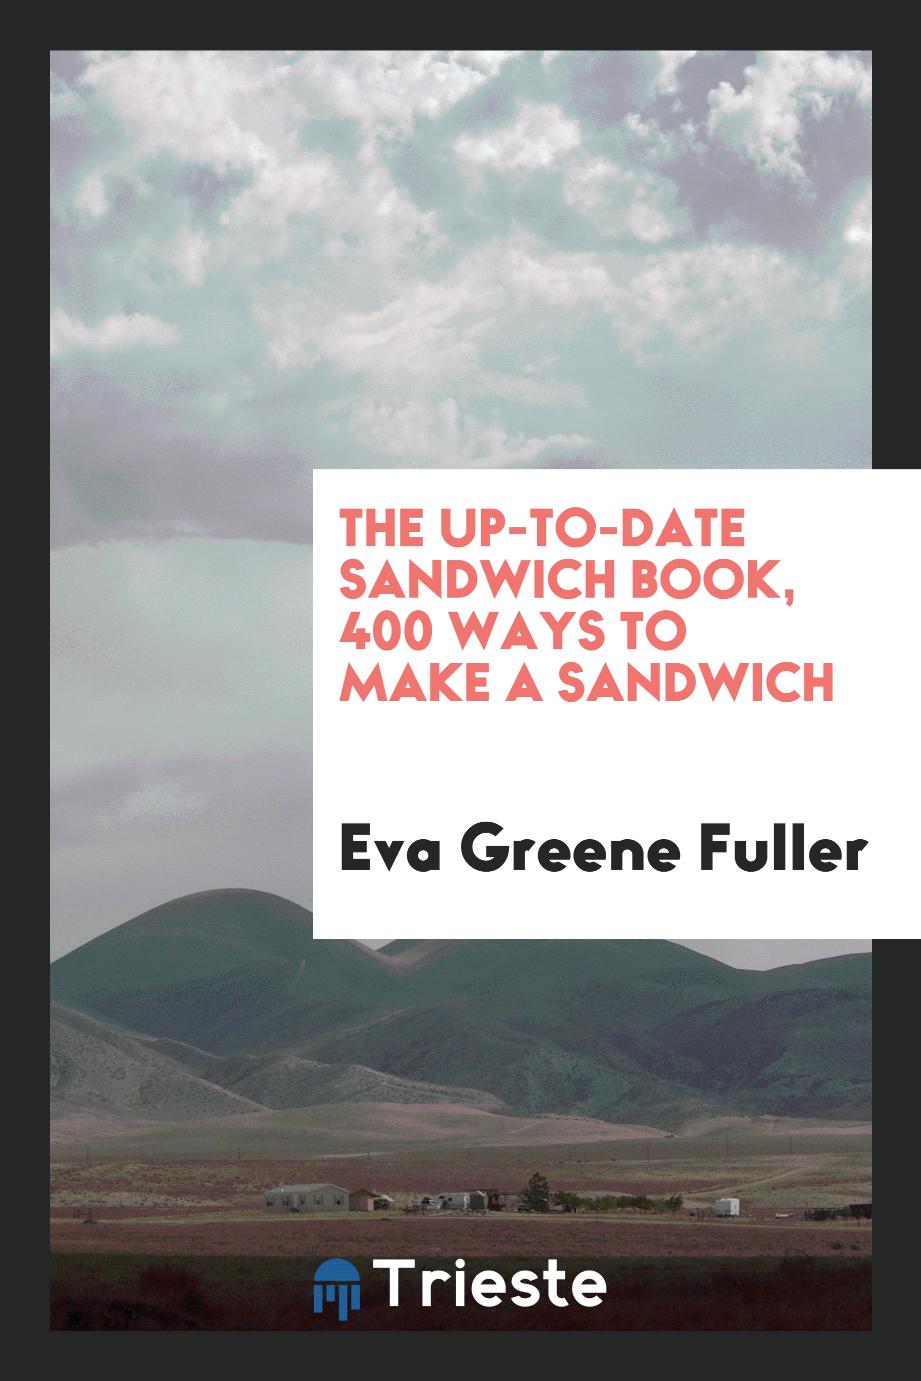 The Up-to-Date Sandwich Book, 400 Ways to Make a Sandwich